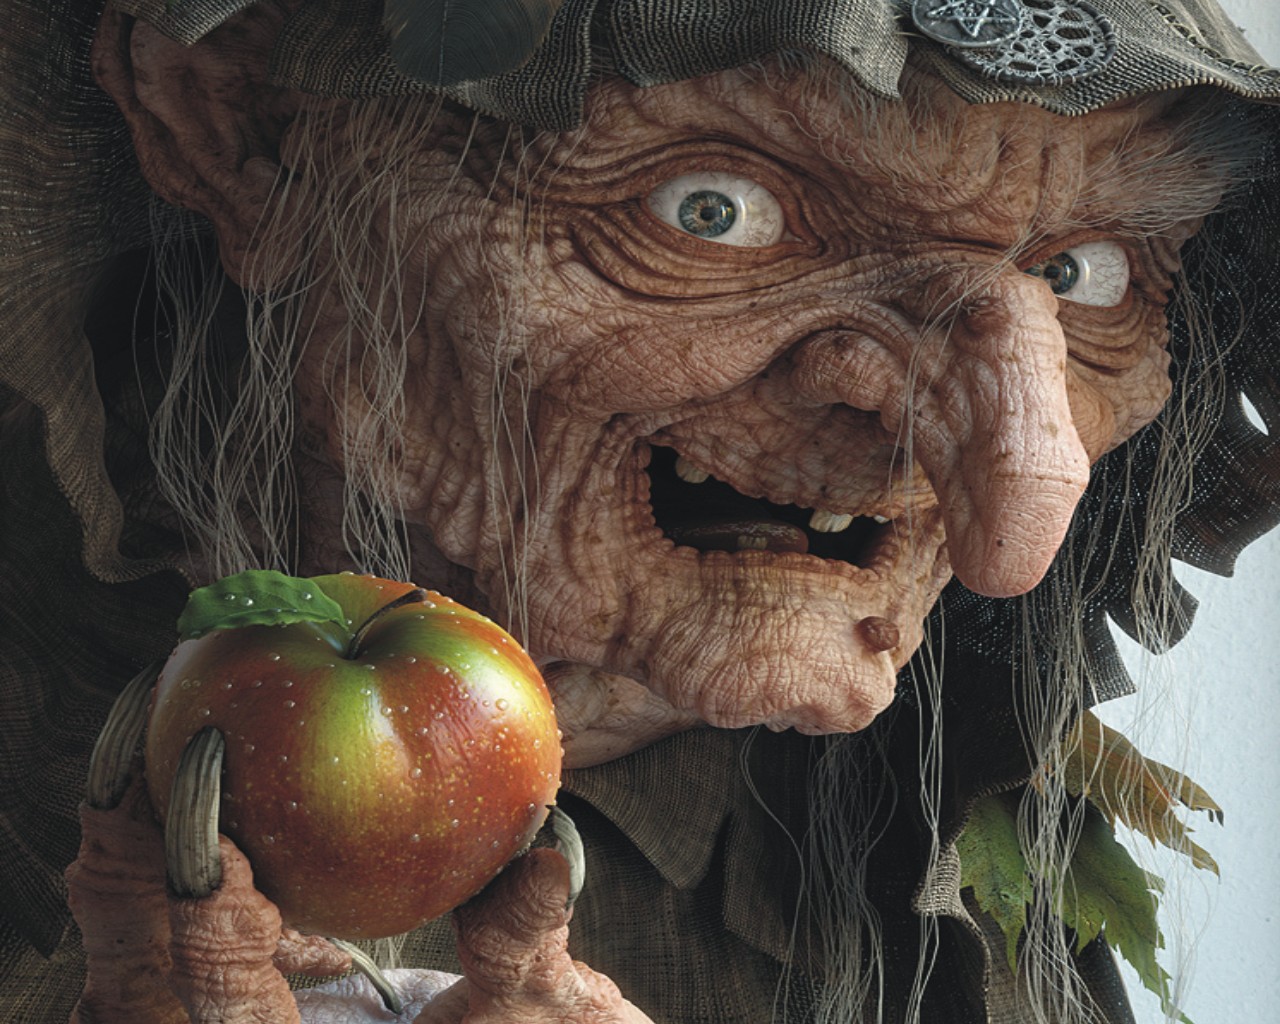 ugly witch with apple Wallpaper Background 27453 1280x1024